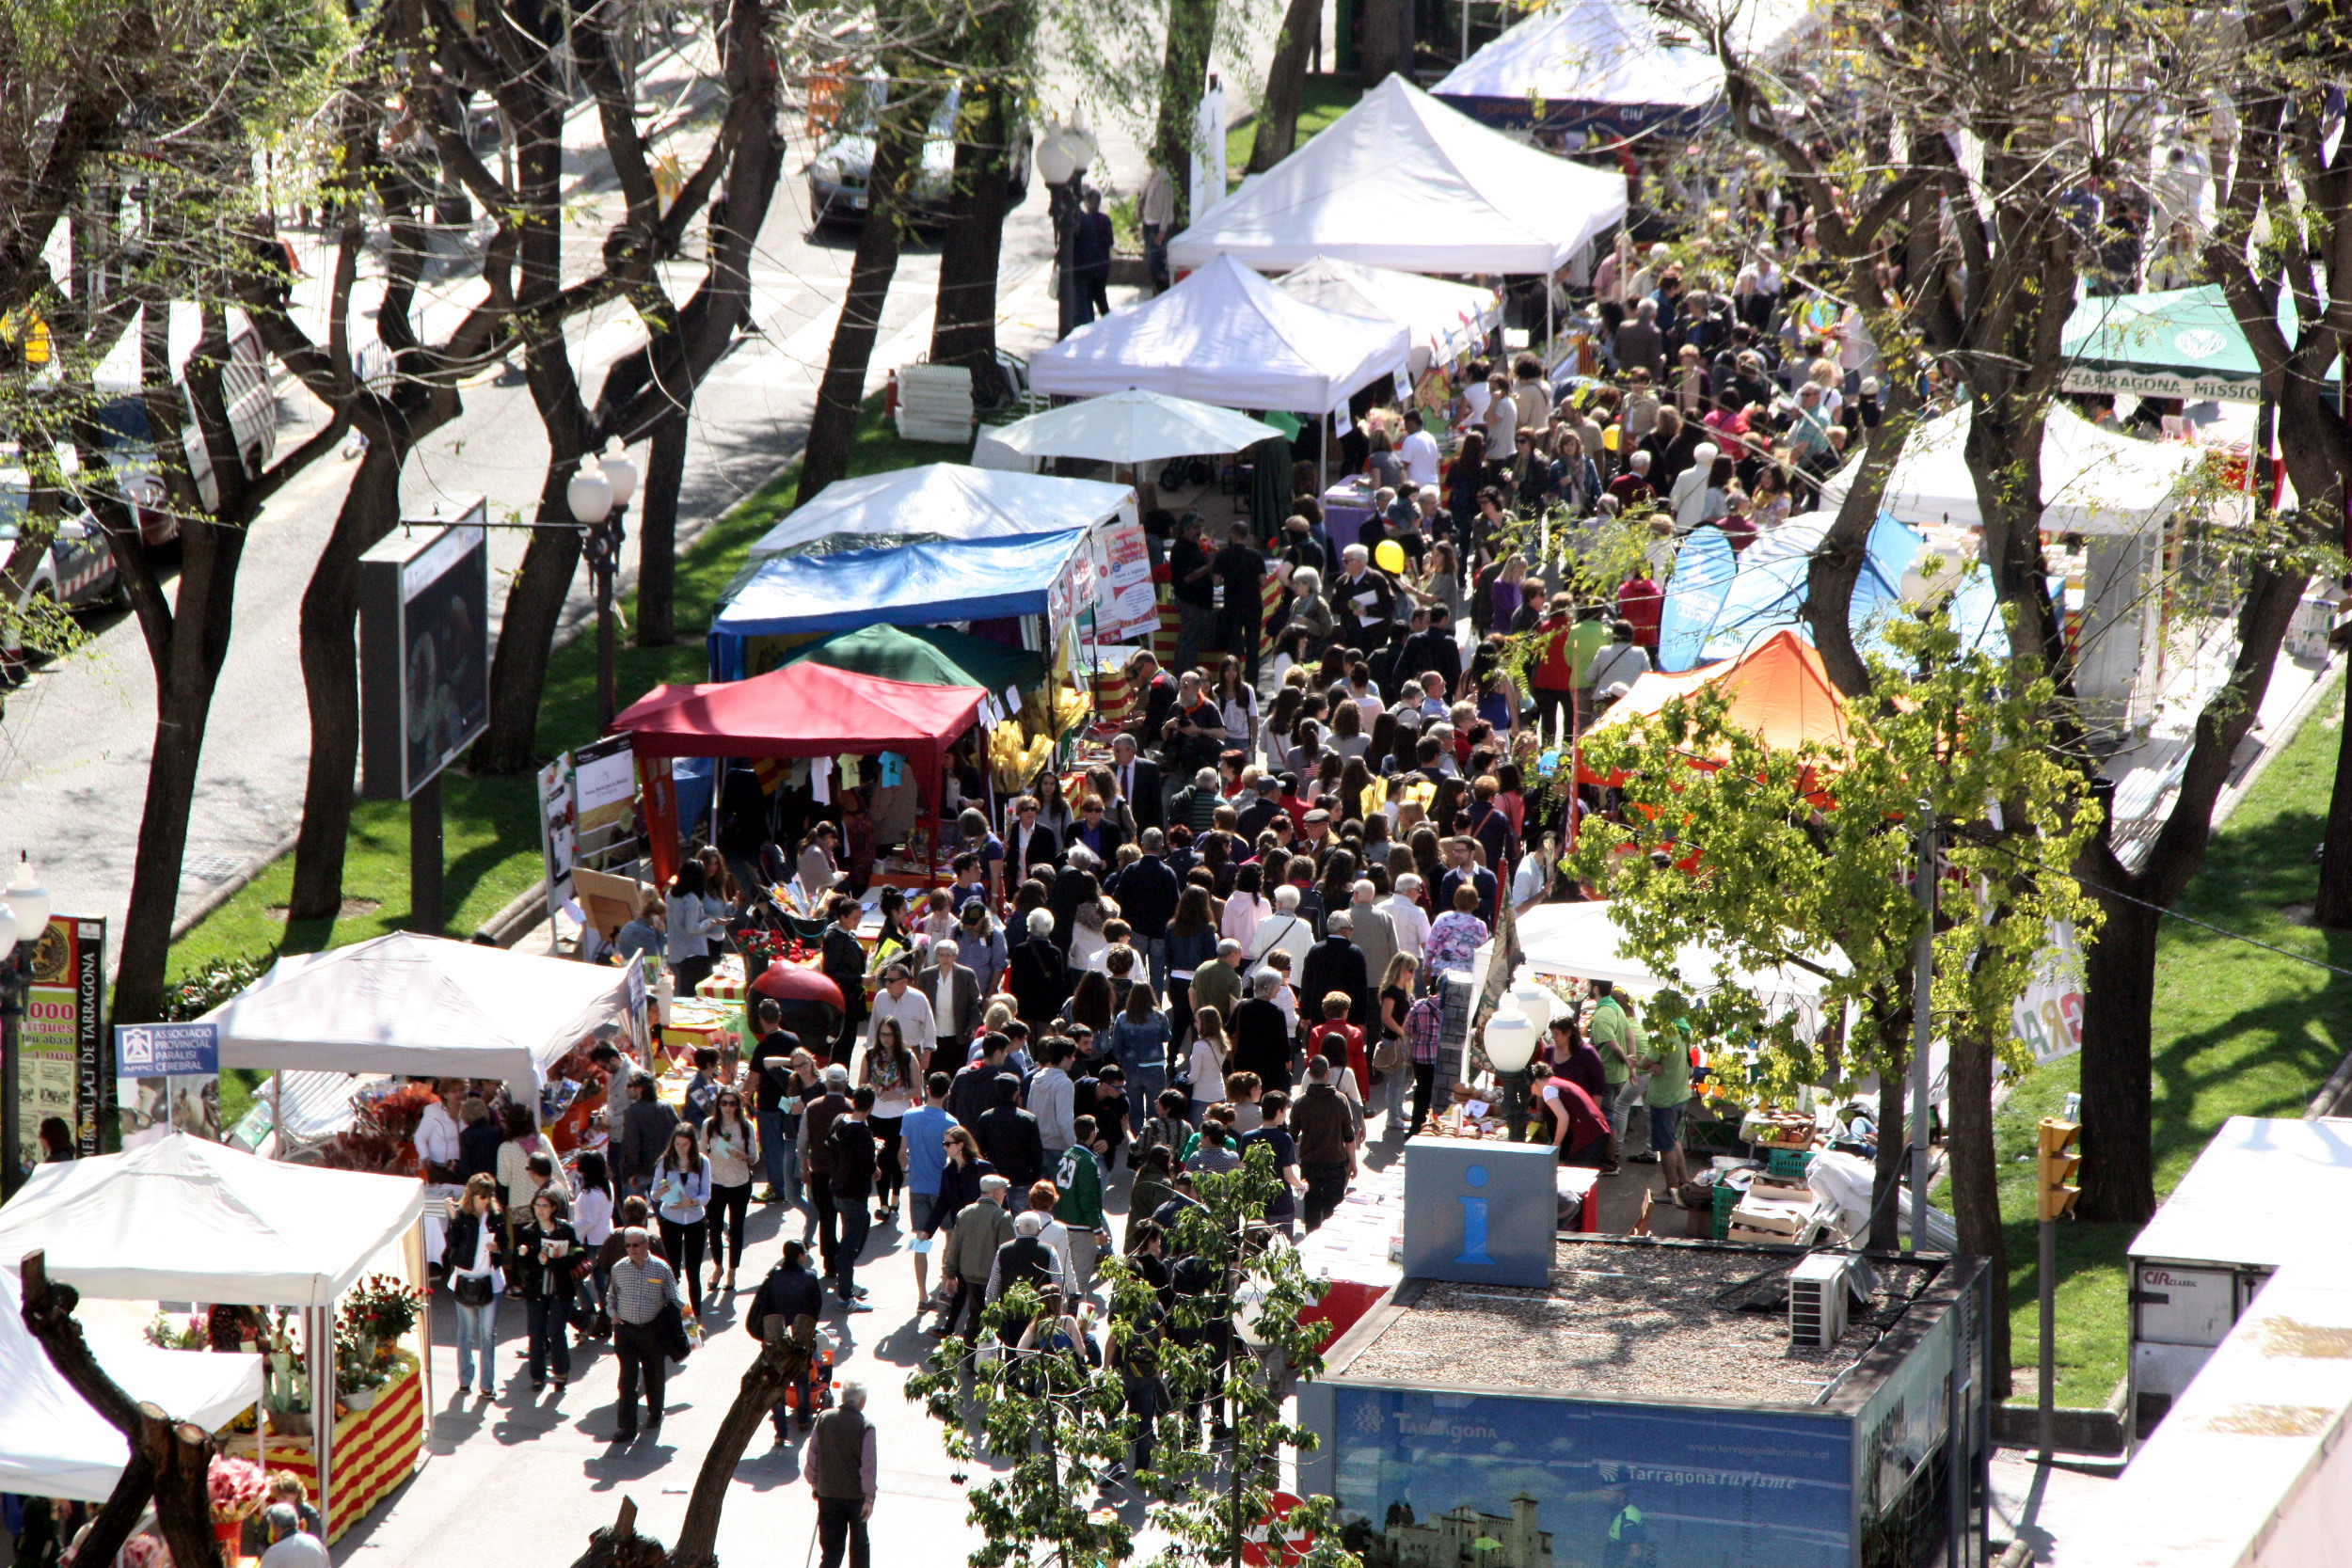 Hundreds of people walking through books and roses' stalls in Tarragona (by ACN)